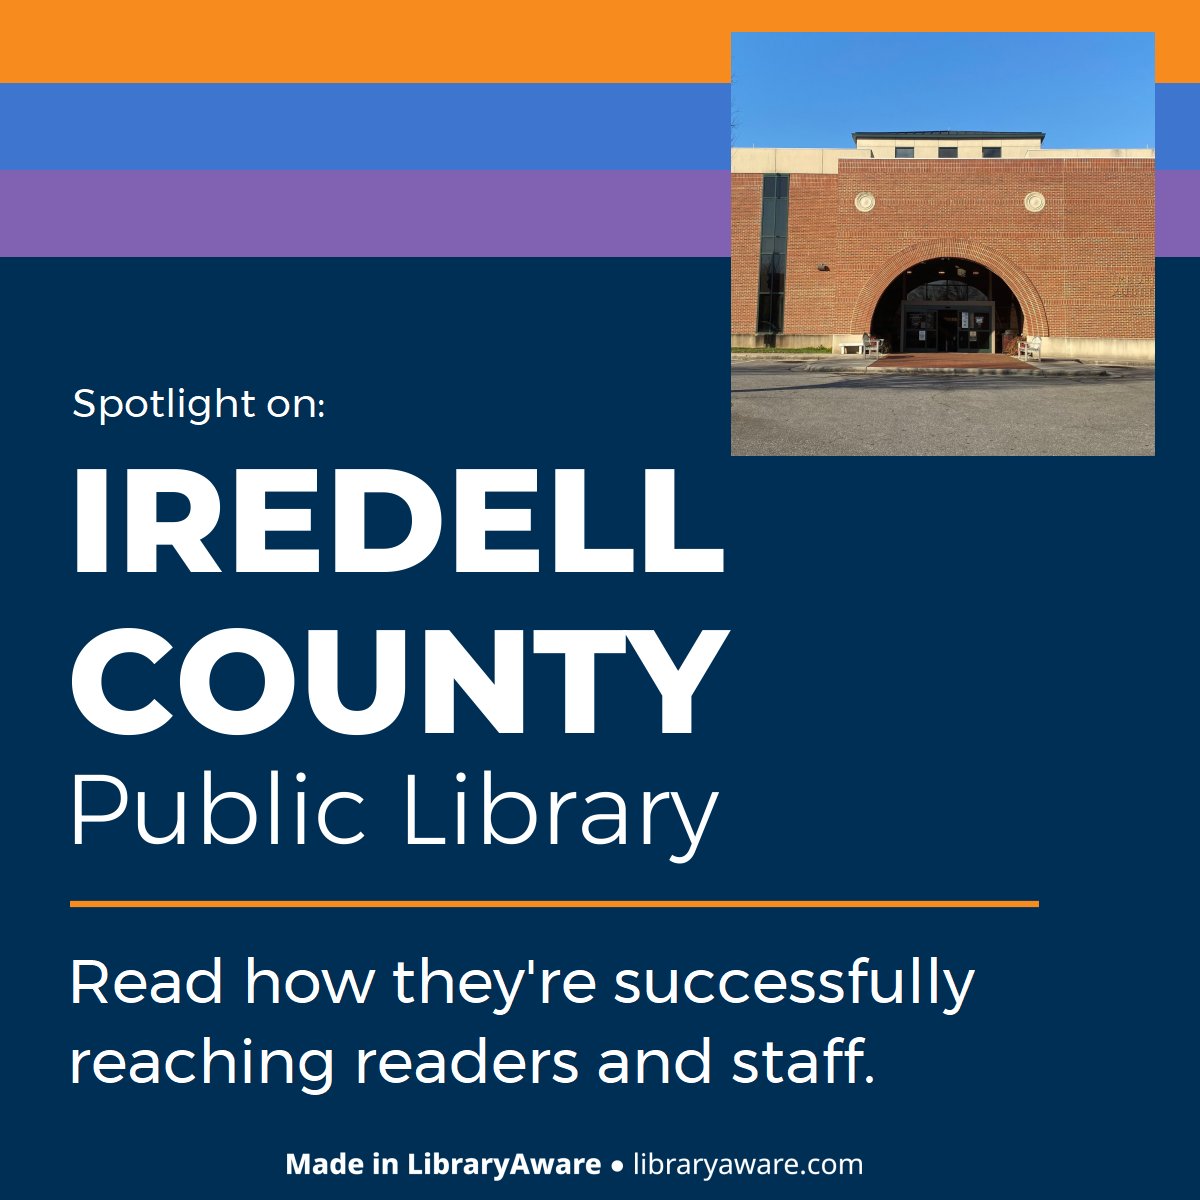 Iredell County Public Library serves mostly suburban neighborhoods on the south end of the county, and rural areas to the north. That population diversity is a challenge. But now the library is sharing the secret for #LibraryMarketing success:  m.ebsco.is/ugOOD